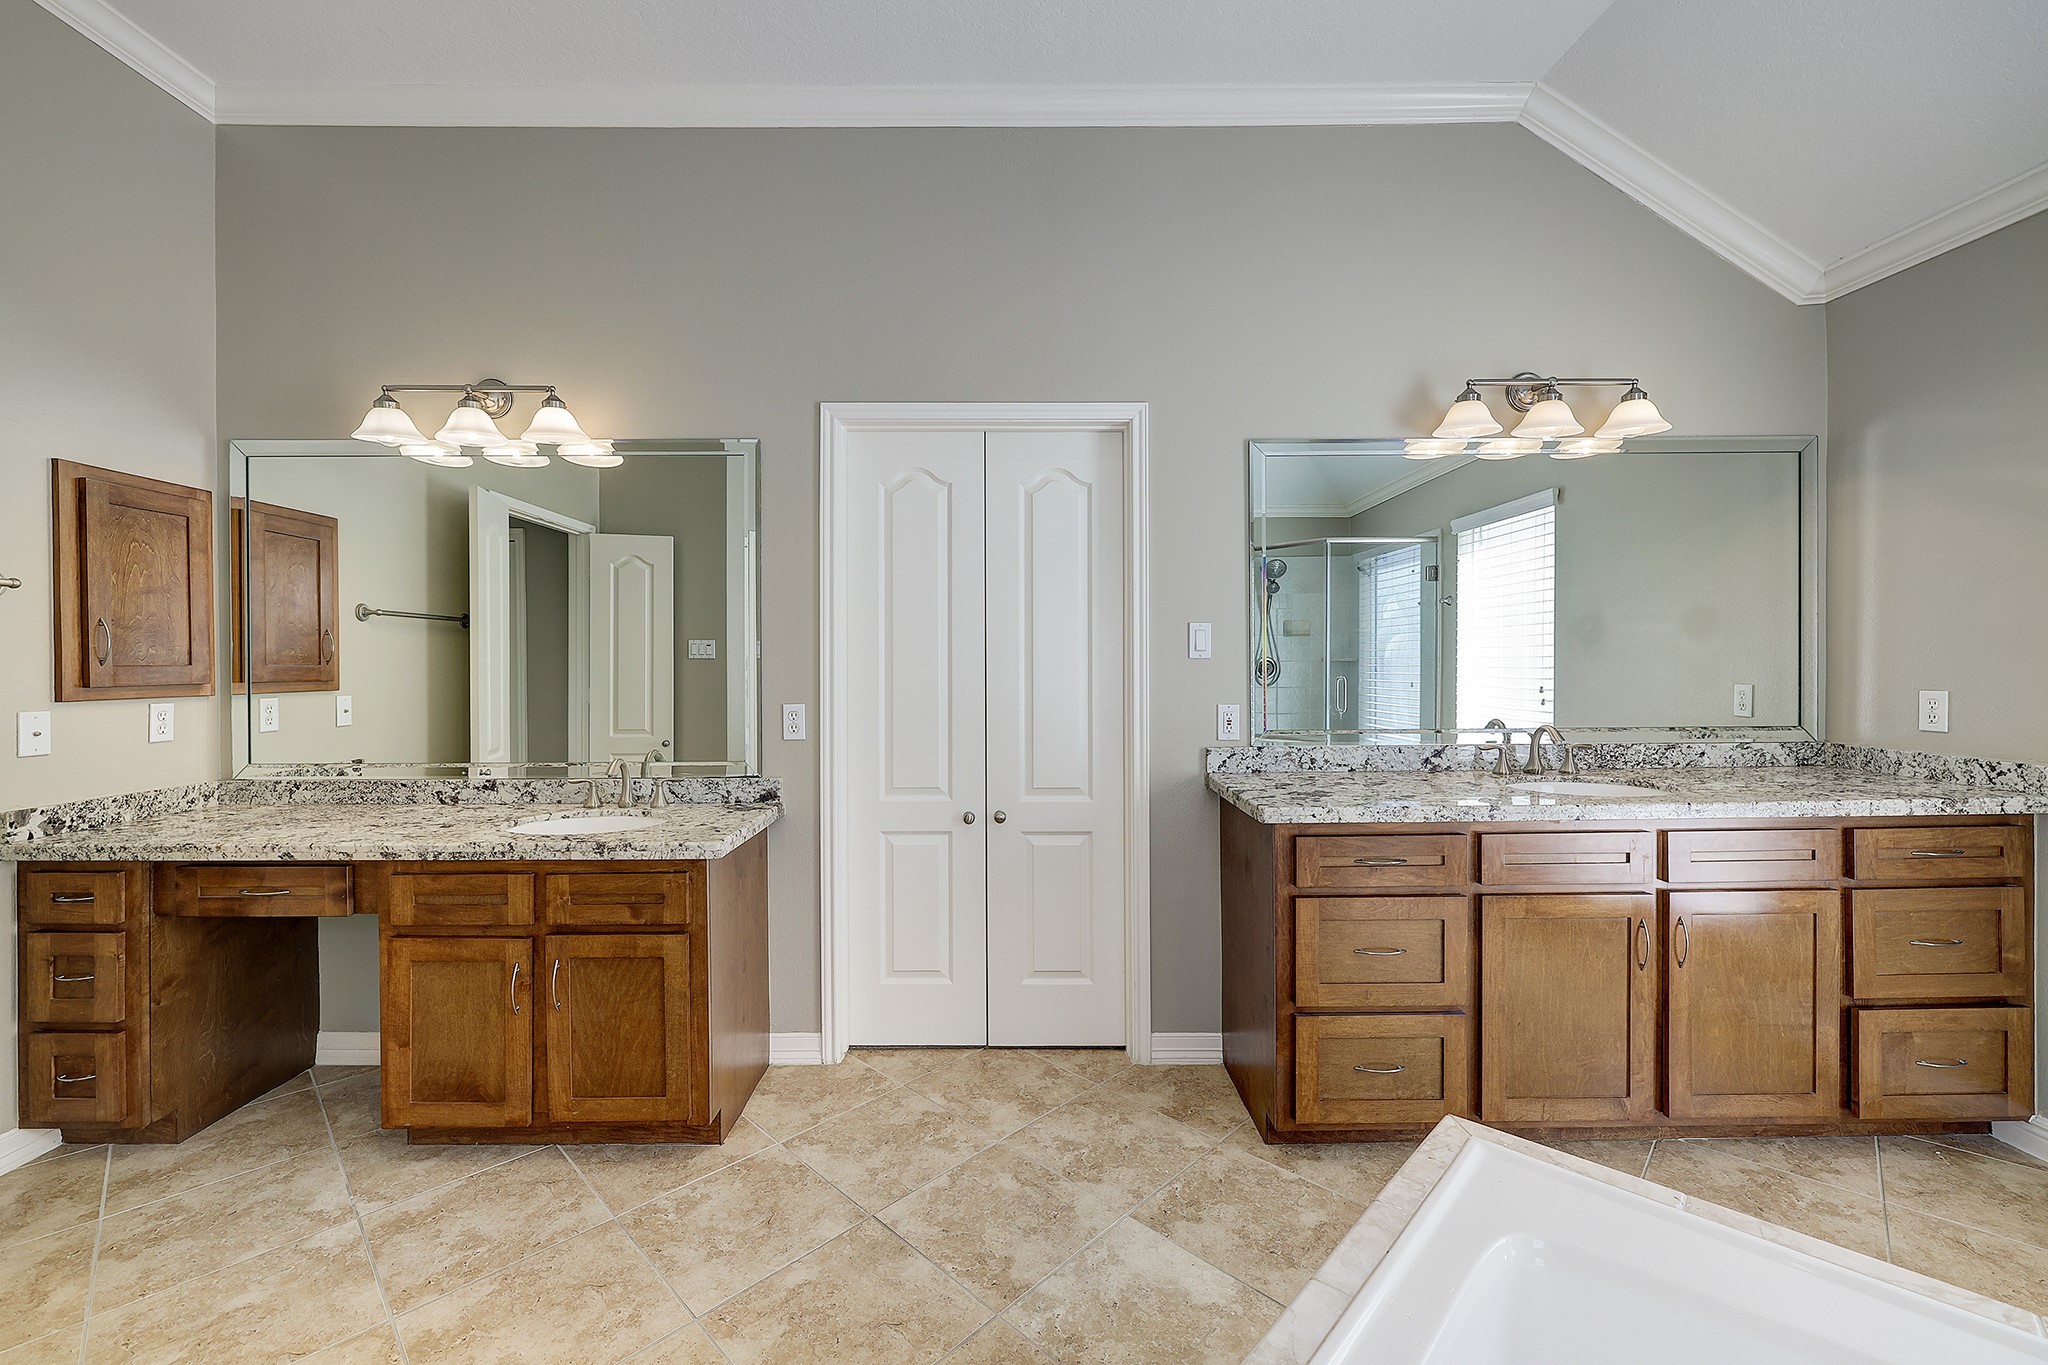 Primary bathroom with double sinks, ample cabinet space, and a charming vanity nook